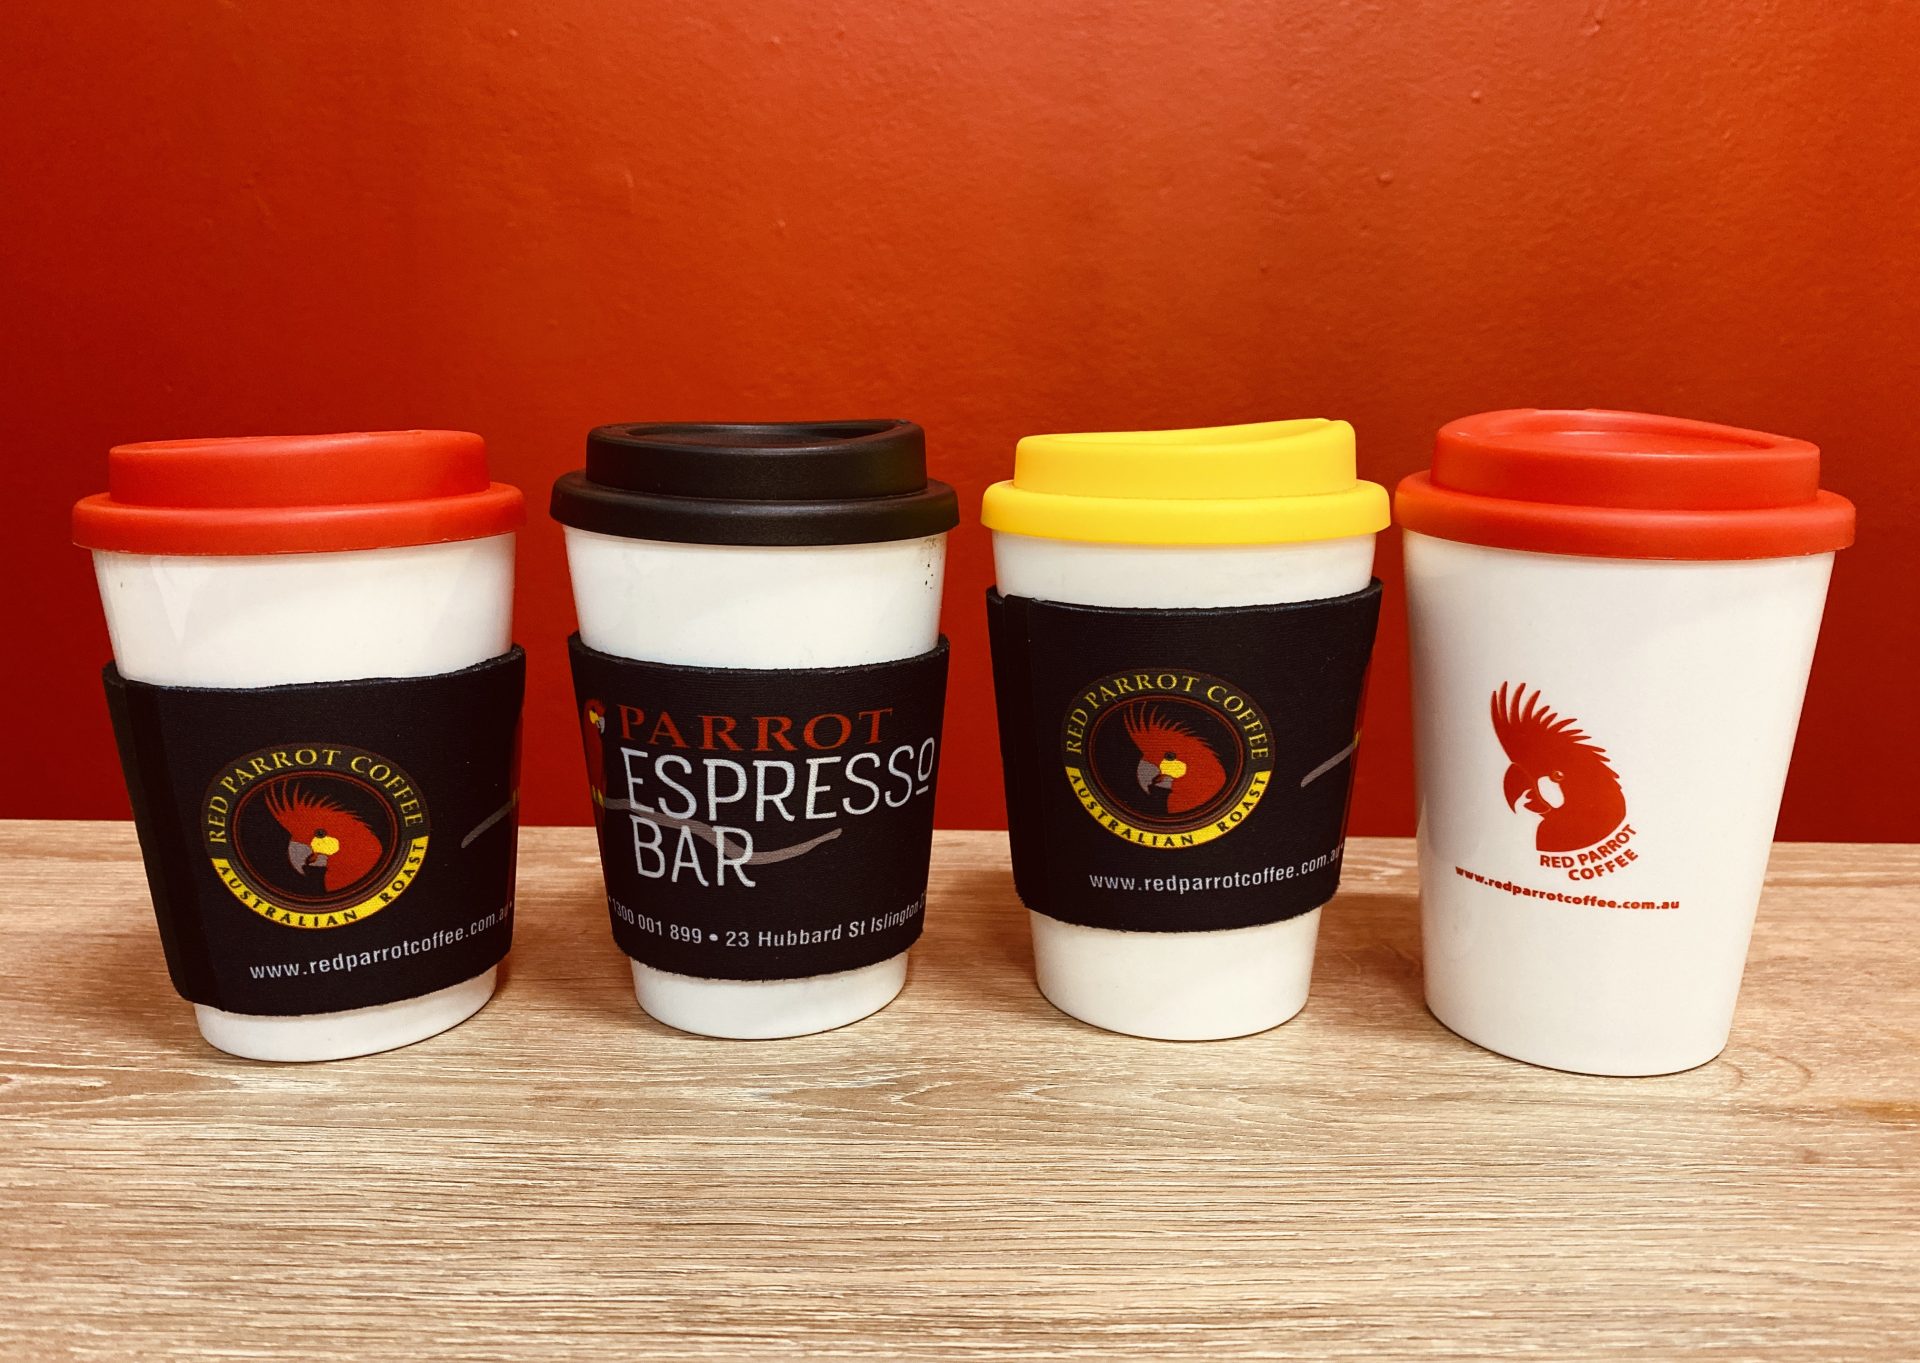 Coffee Keep Cups with Red Parrot - Espresso Bar branding